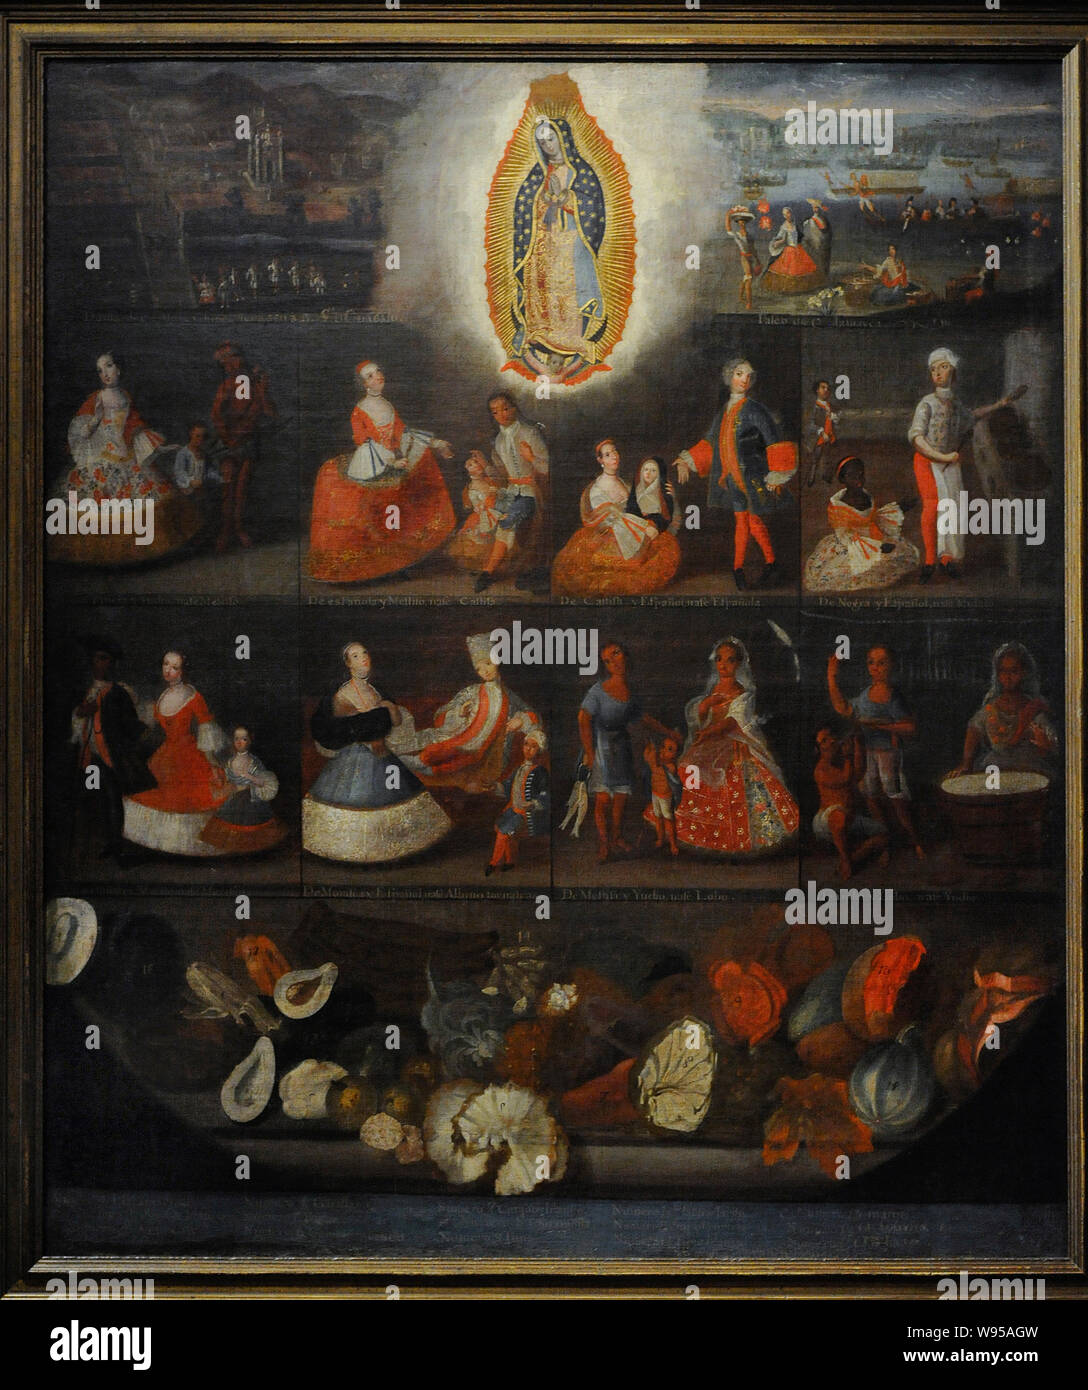 Luis de Mena (Mexican artist). 'Castas', ca. 1750. Casta painting genre. Virgin of Guadalupe surrounded by people dancing before the Basilica and Mexican ride of Jamaica with boats. Central part: scenes of miscegenation. Bottom: still life of fruits. Oil on canvas (119 x 103 cm). Viceroyalty of New Spain. Mexico. Museum of the Americas. Madrid, Spain. Stock Photo